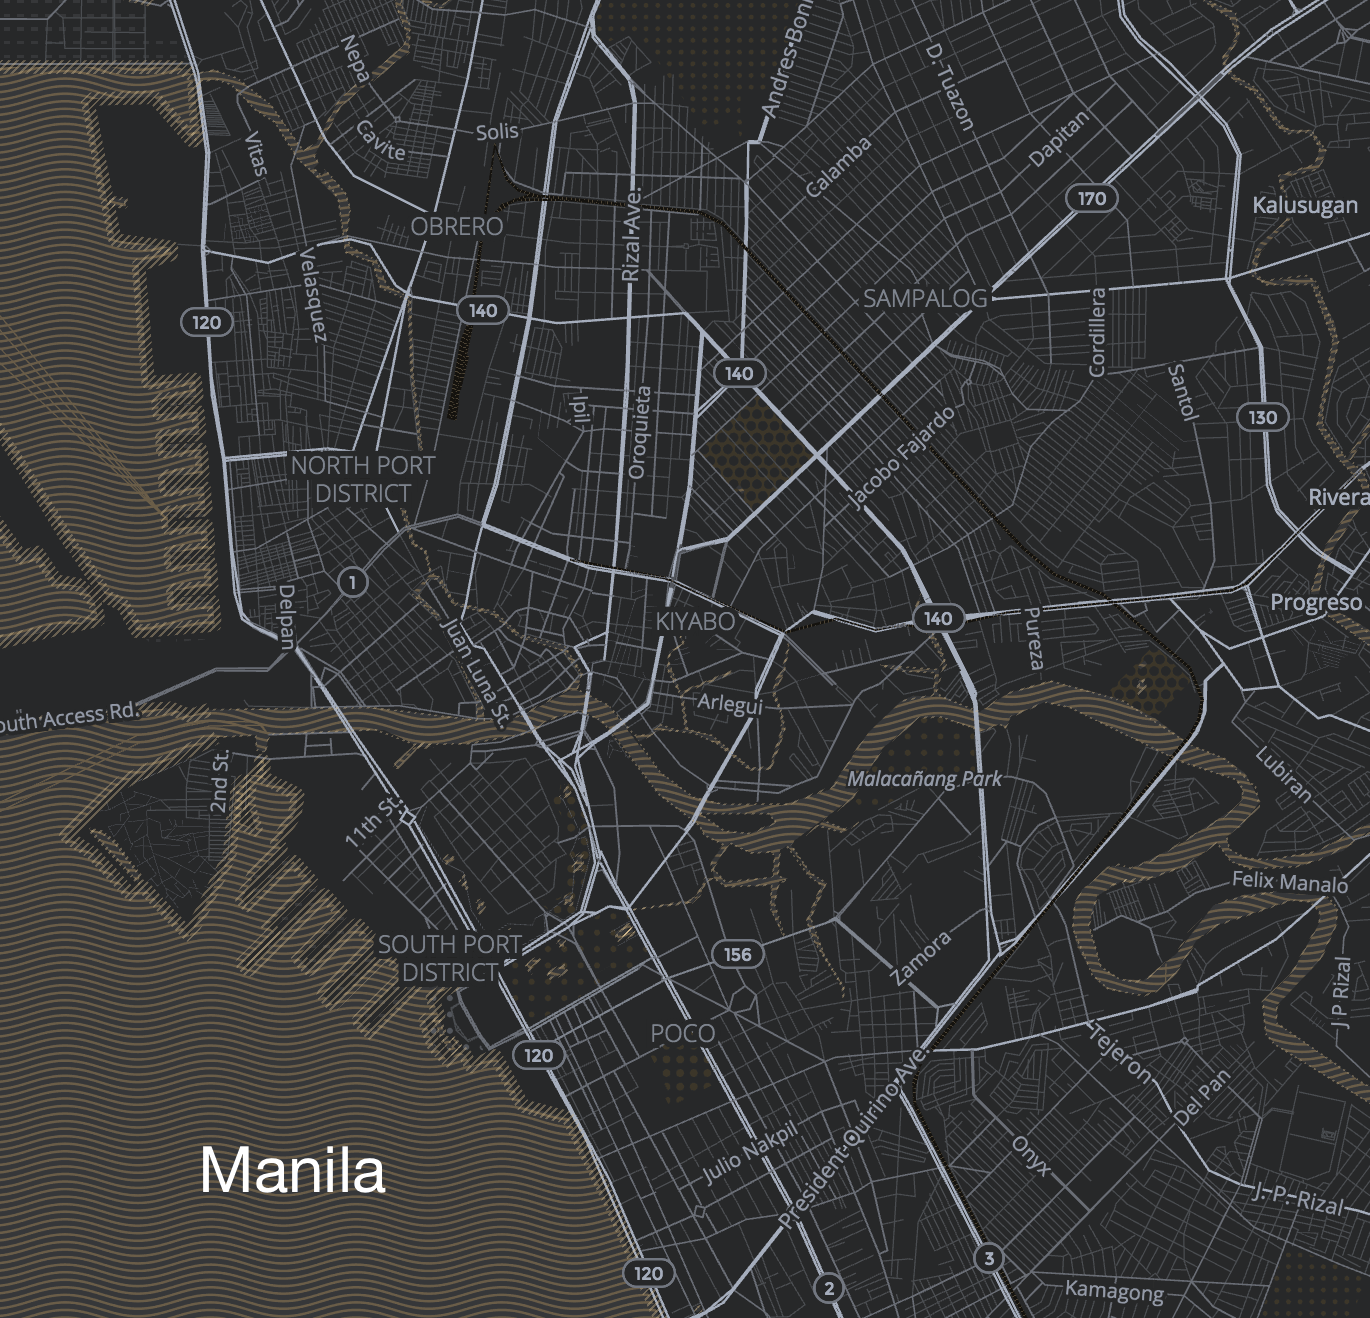 animation of OSMLR segments for levels 0, 1, and 2 in Manila